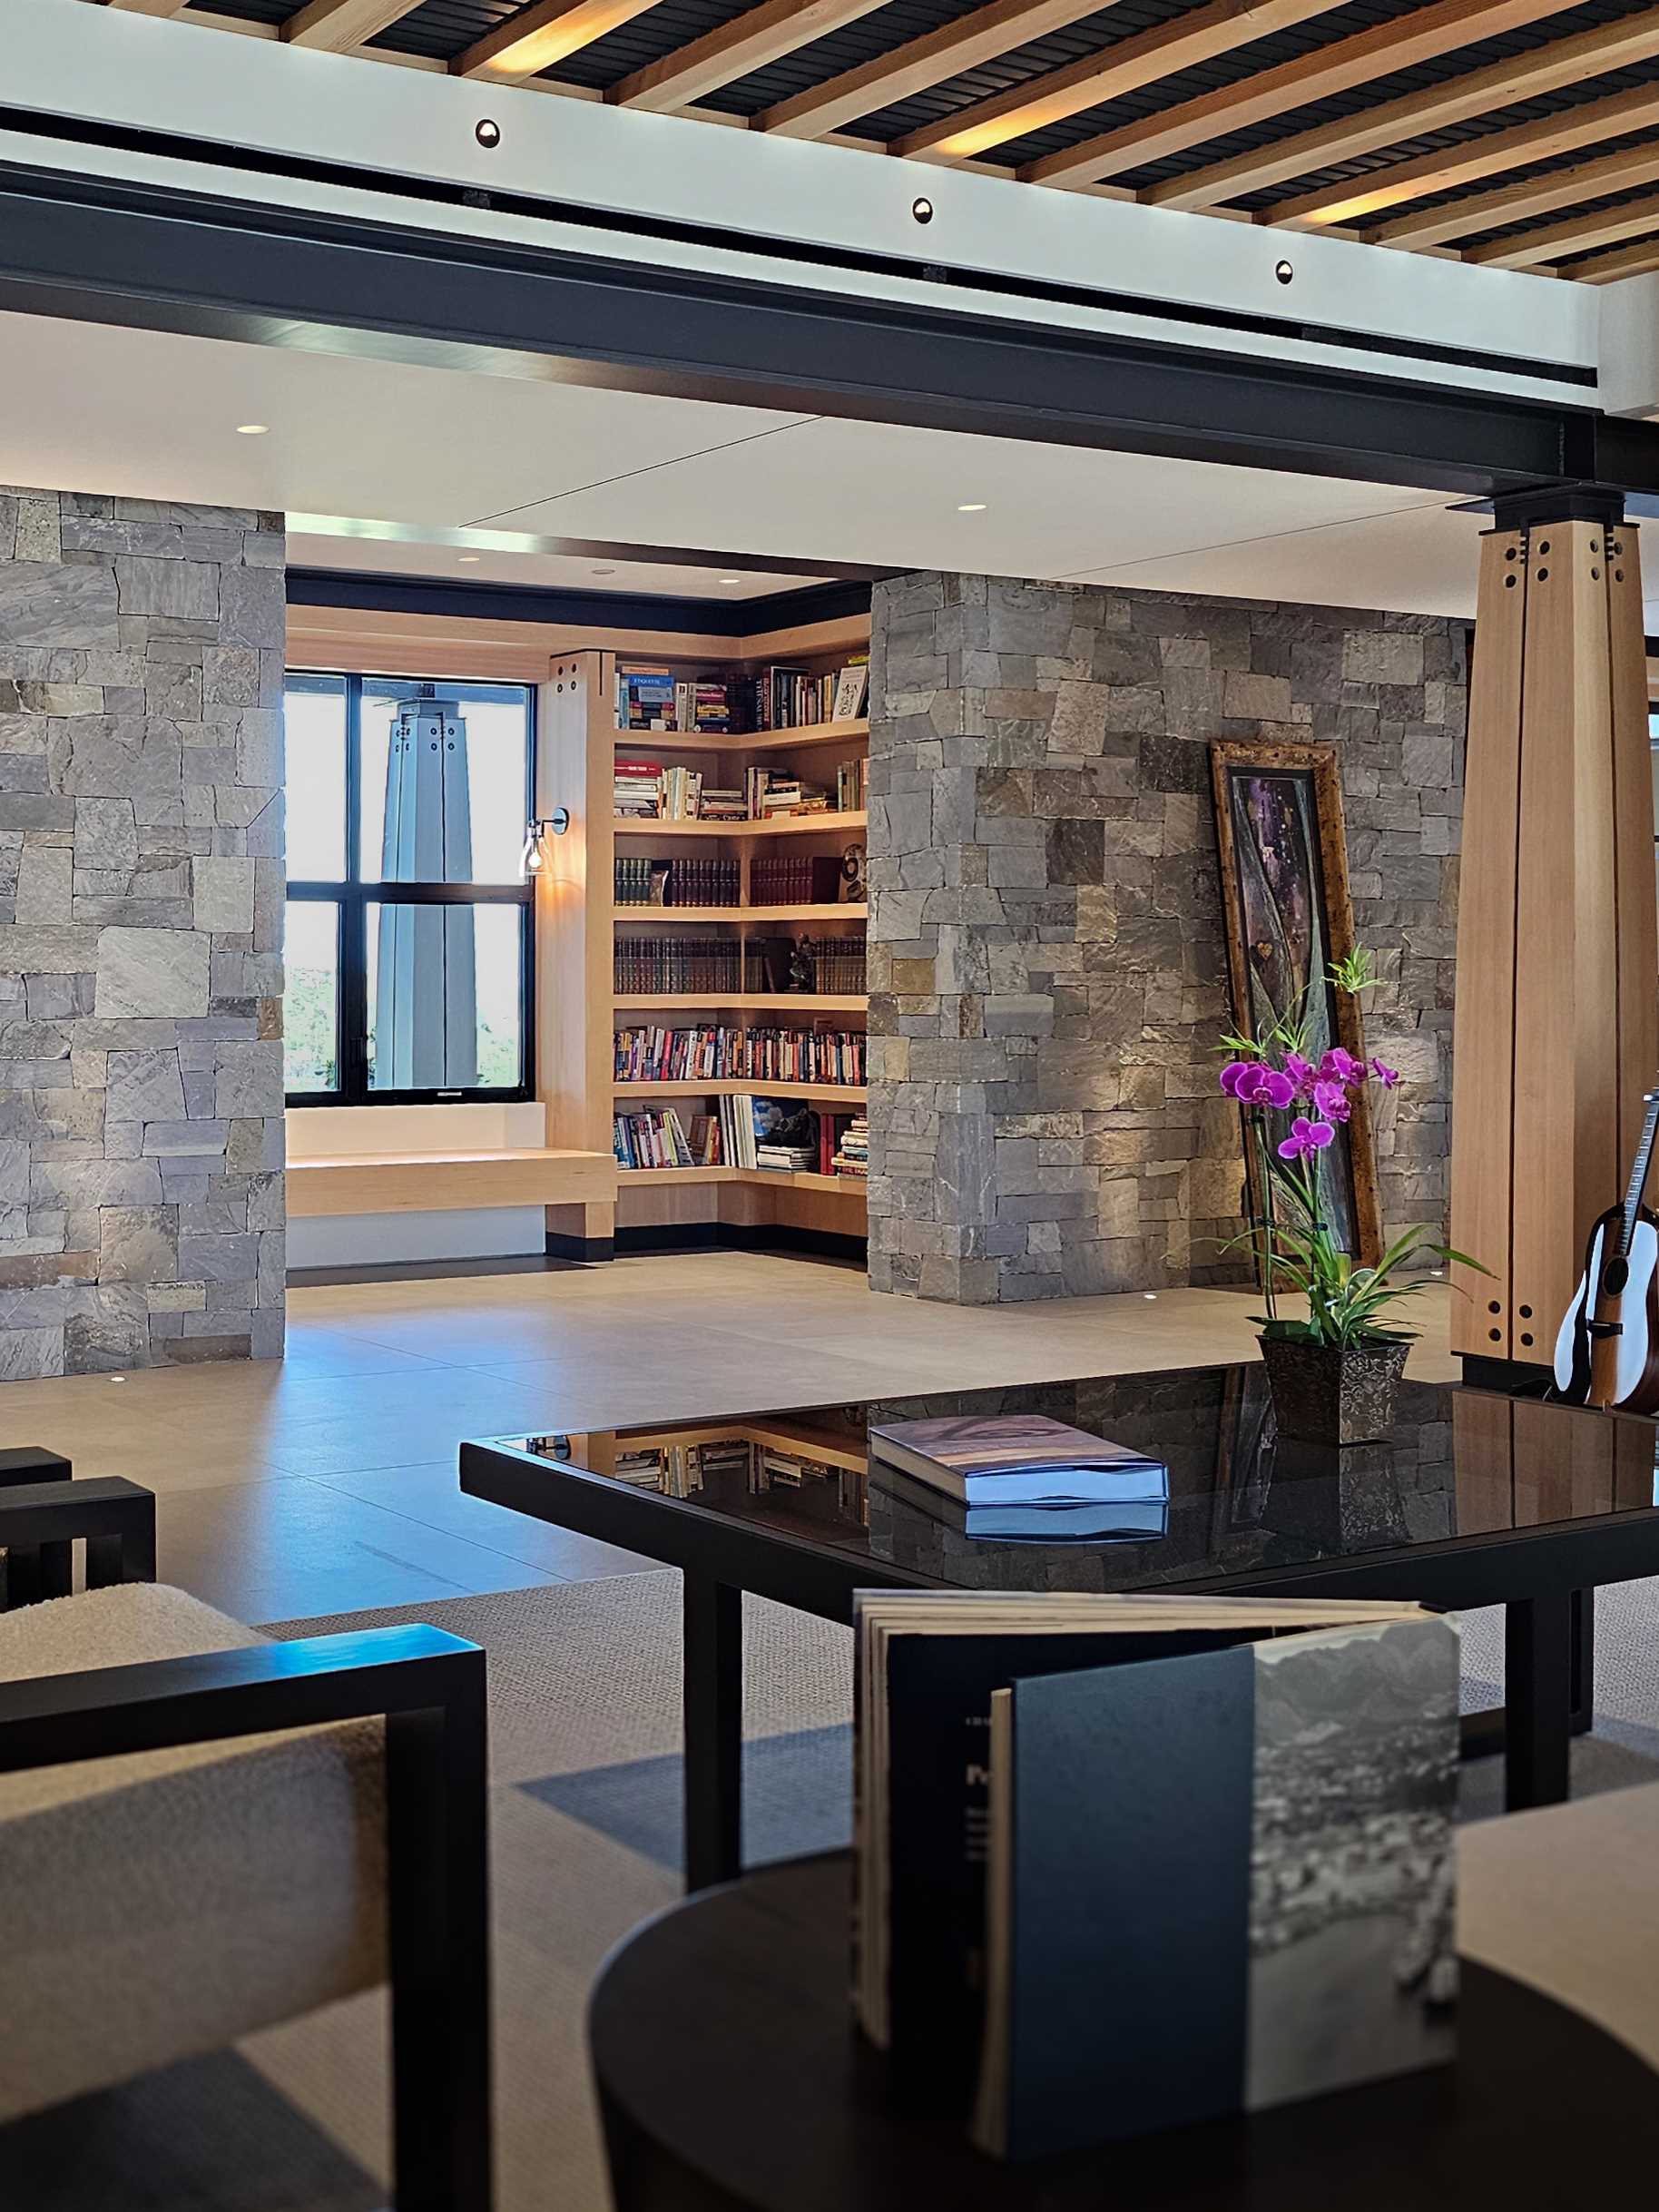 A contemporary house with built-in bookshelves.